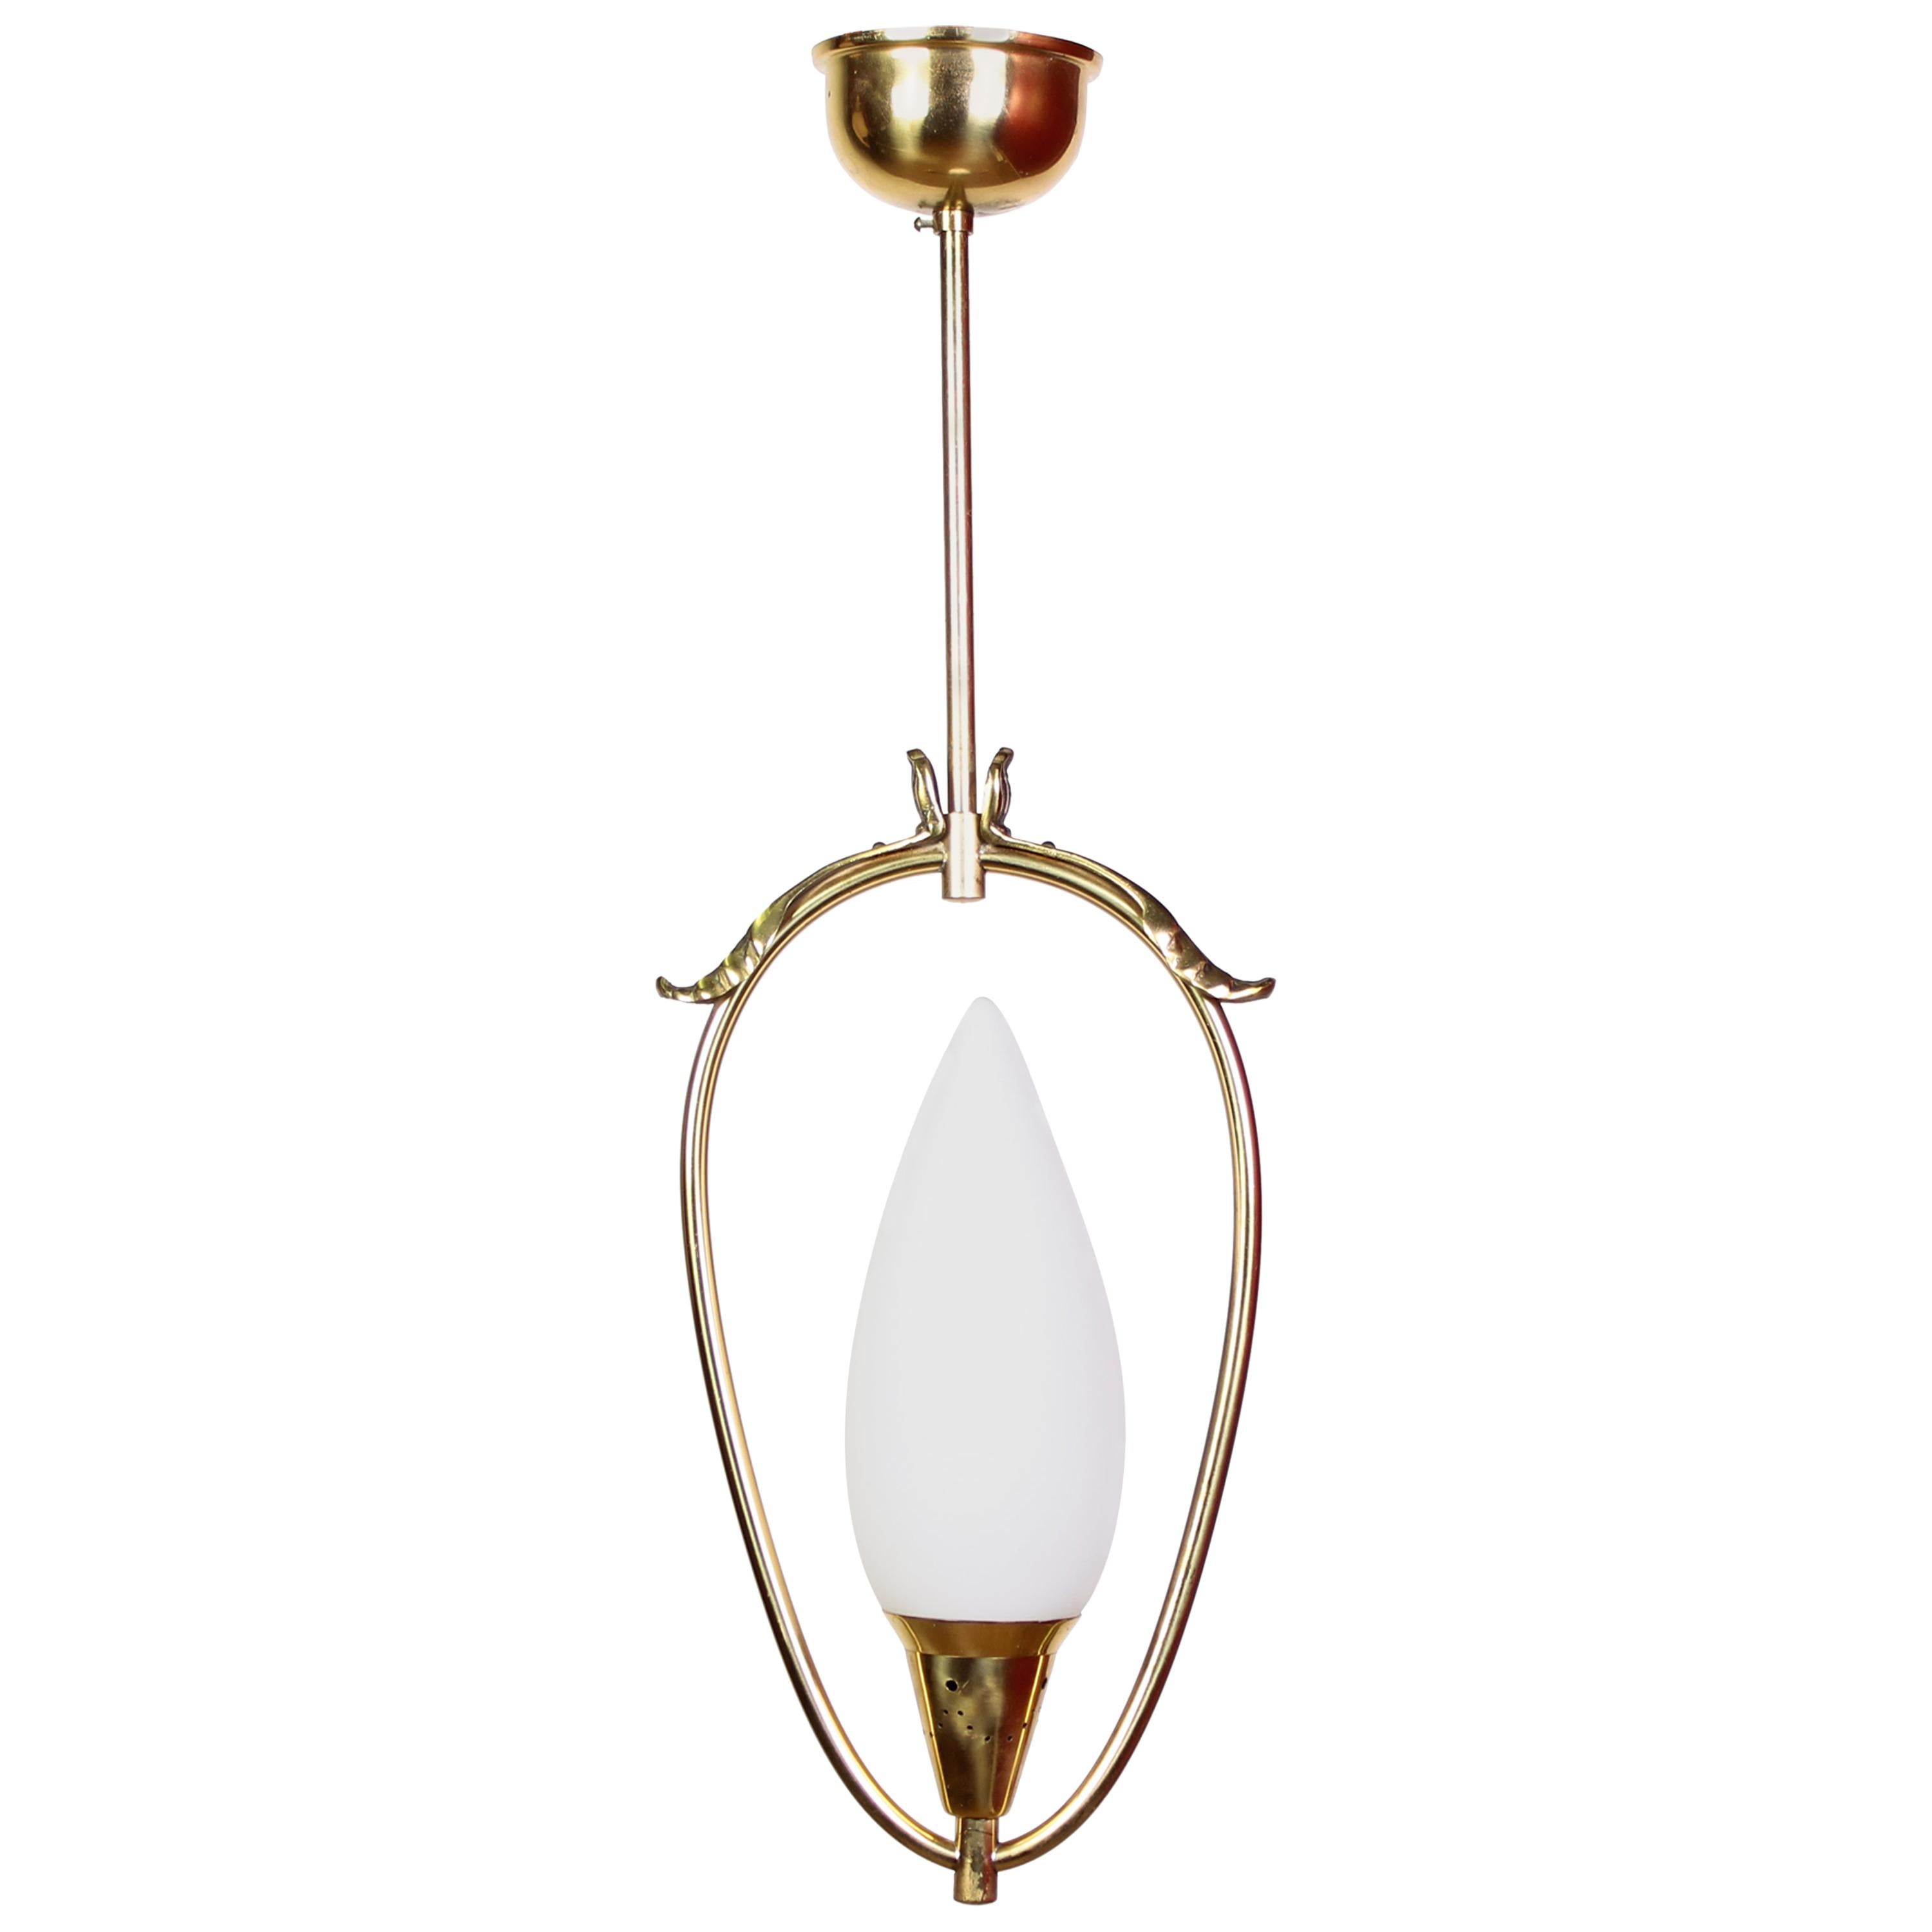 Swedish Brass and Opaline Glass Ceiling Lamp, 1940s For Sale